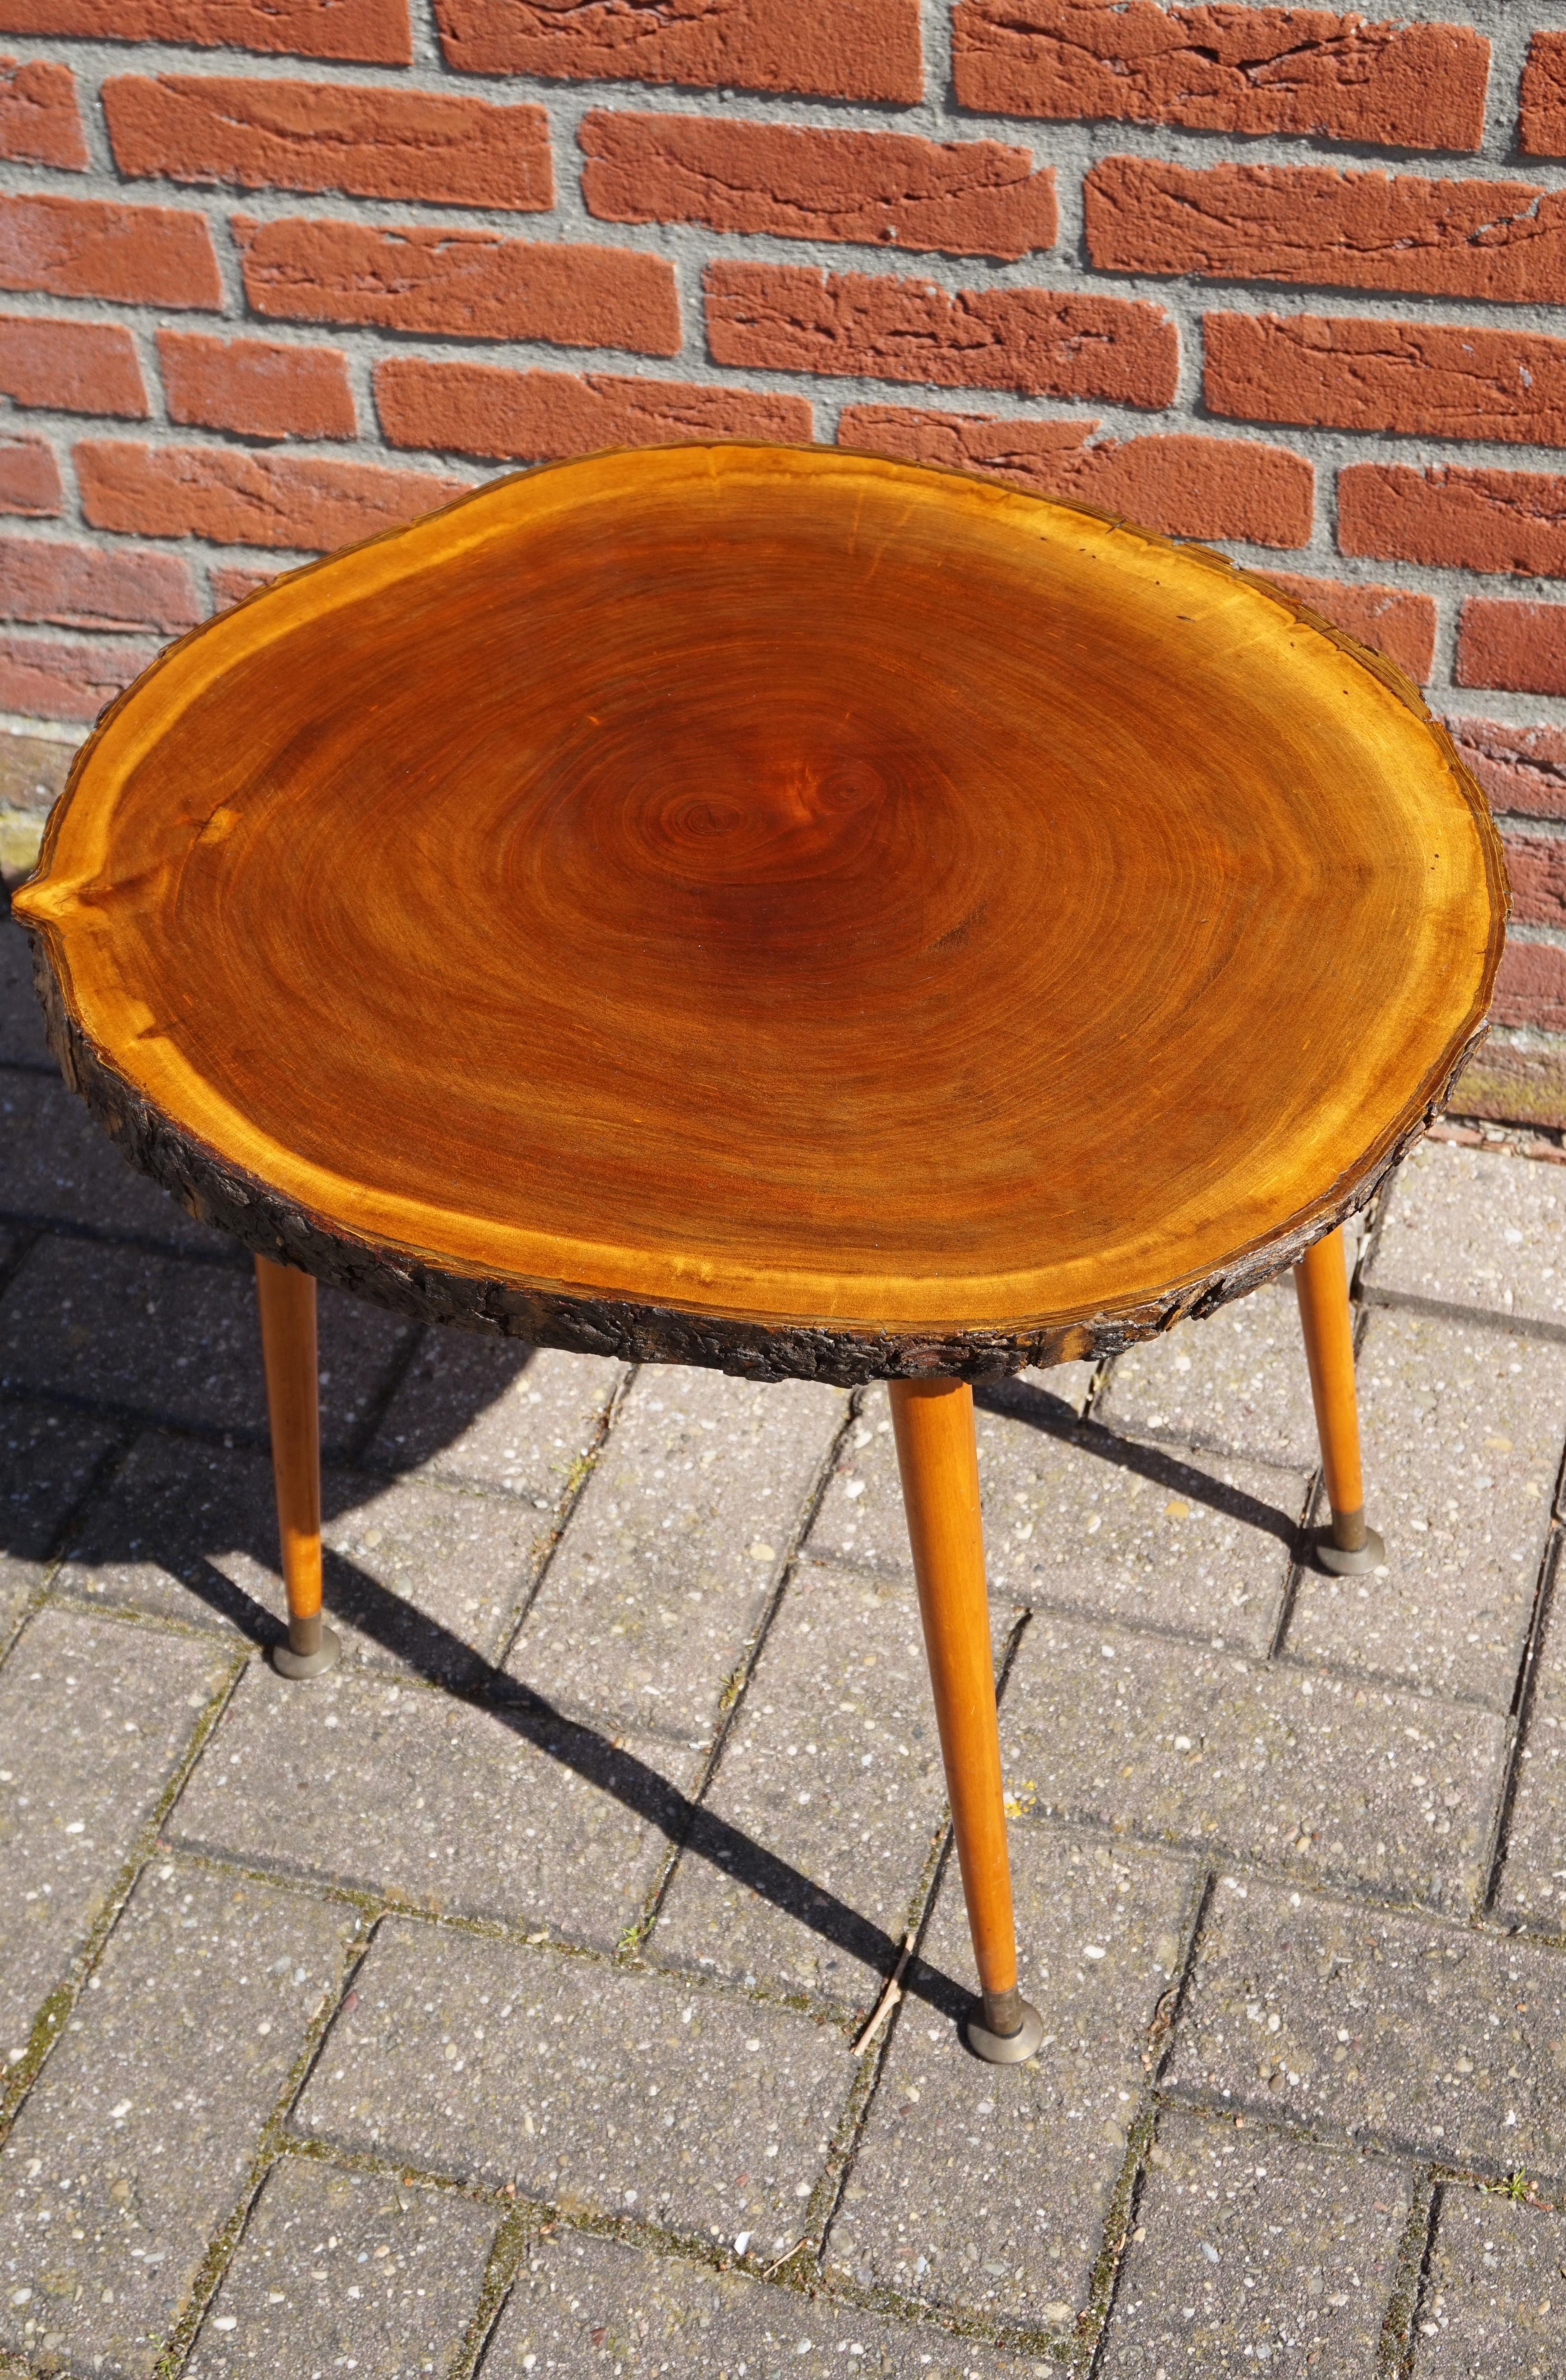 European Midcentury Made Organic Modern Wine or End Table with Walnut & Bark Table Top For Sale